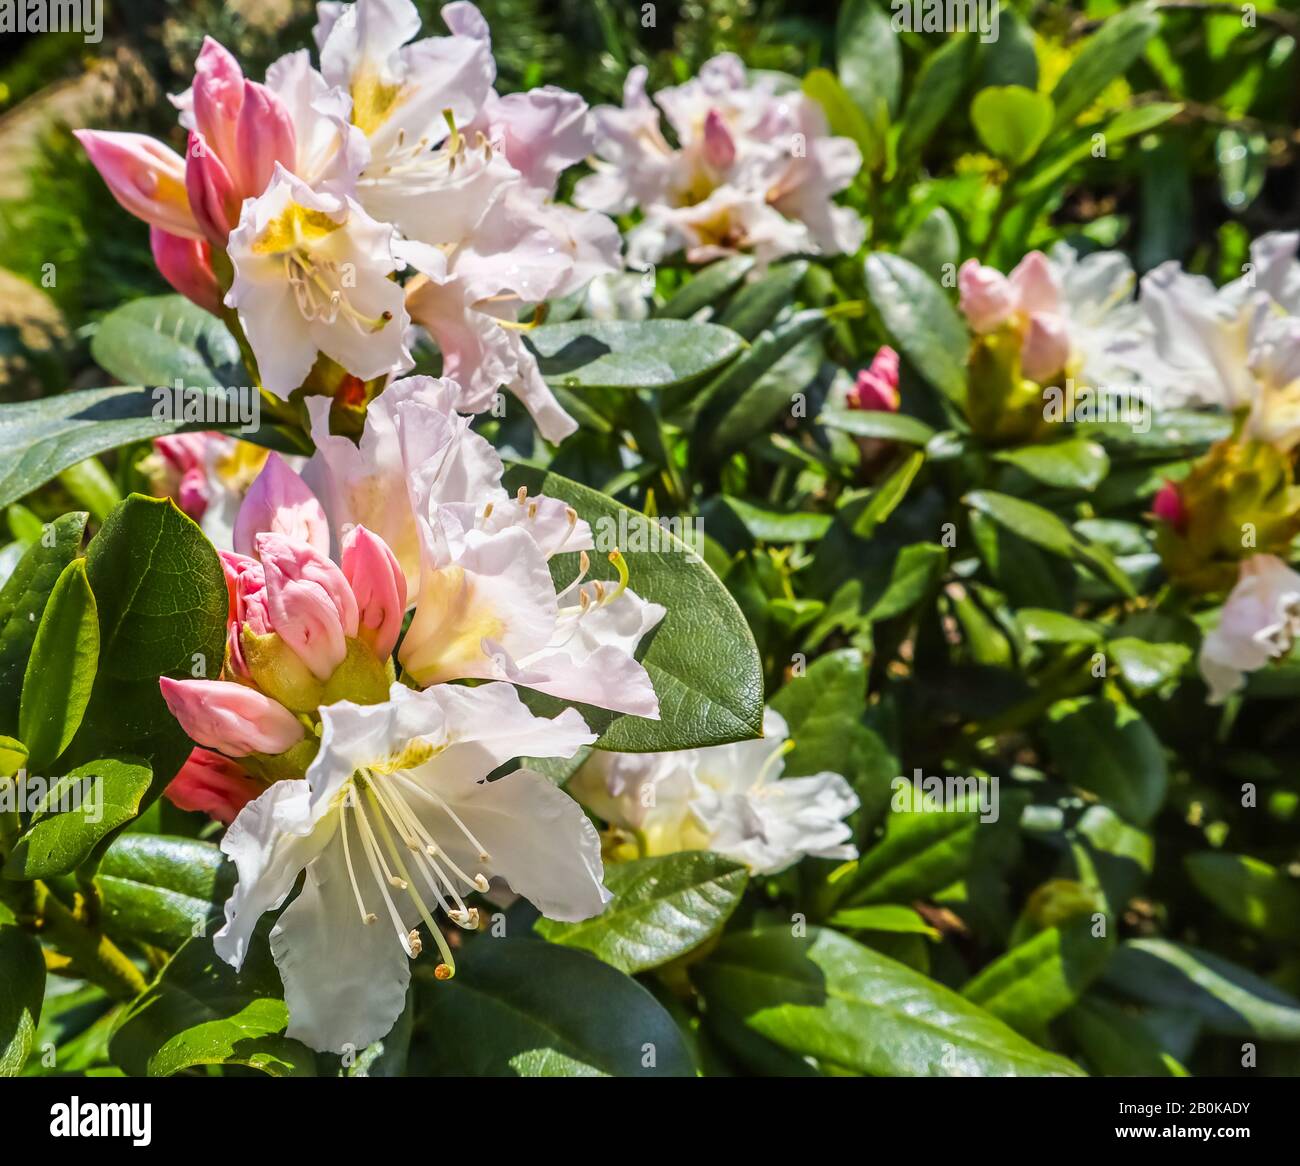 Opening of beautiful flower of Rhododendron 'Cunningham's White' in spring garden Stock Photo